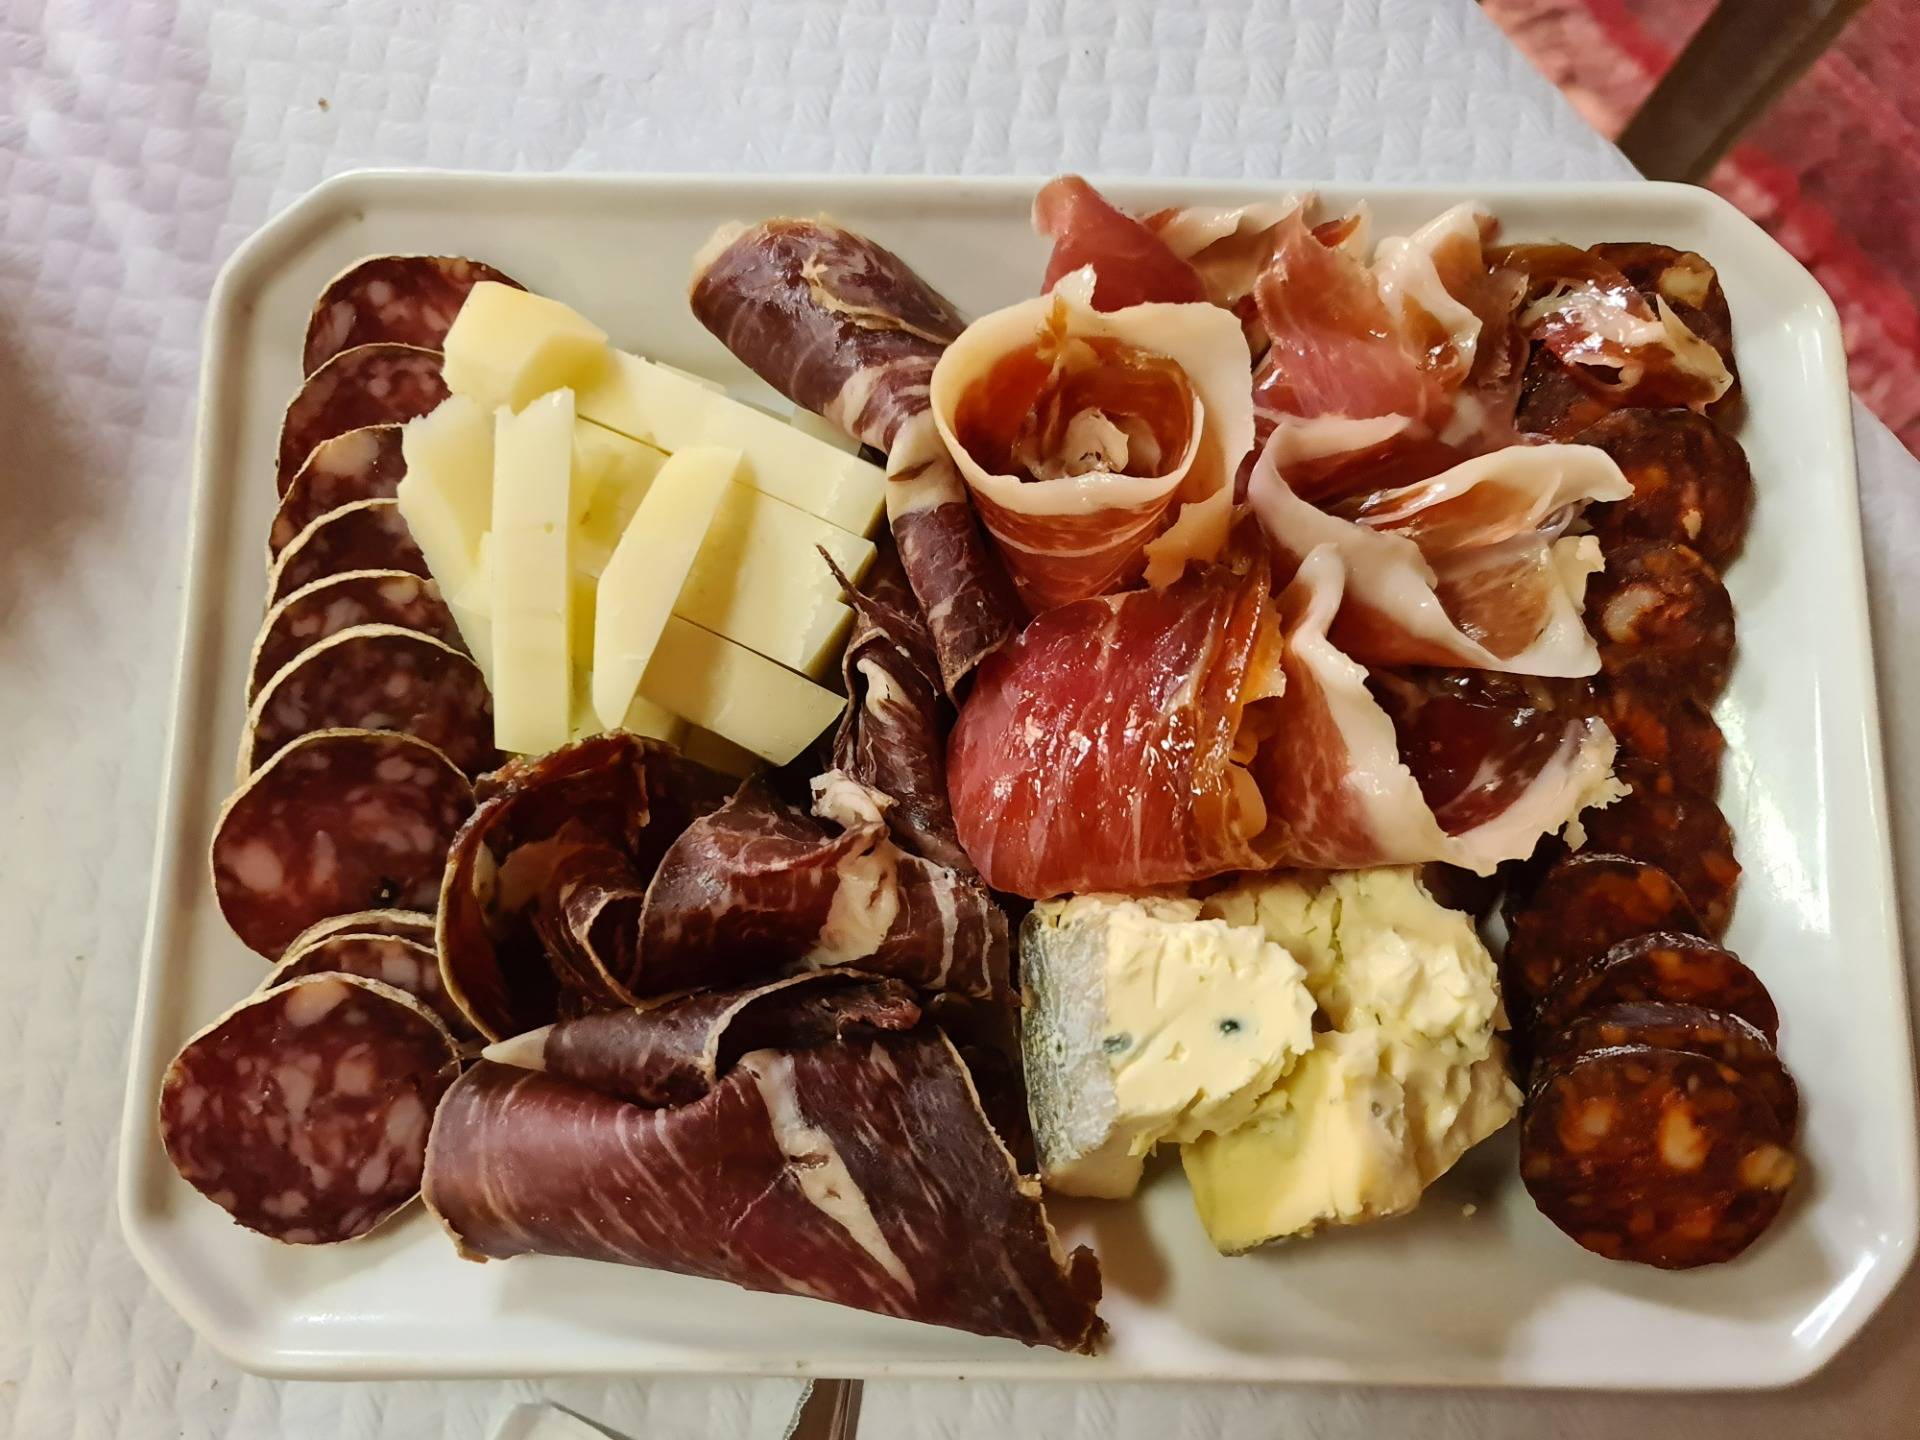 Half board of assorted artisan cold meat (famouse Leonese beef jerky + smoked Serrano ham) and sausages (cured white and red sausages) and cheeses (blue sheep cheese, Cabrales type + aged cow cheese) - (€12, sided with artisan bread).